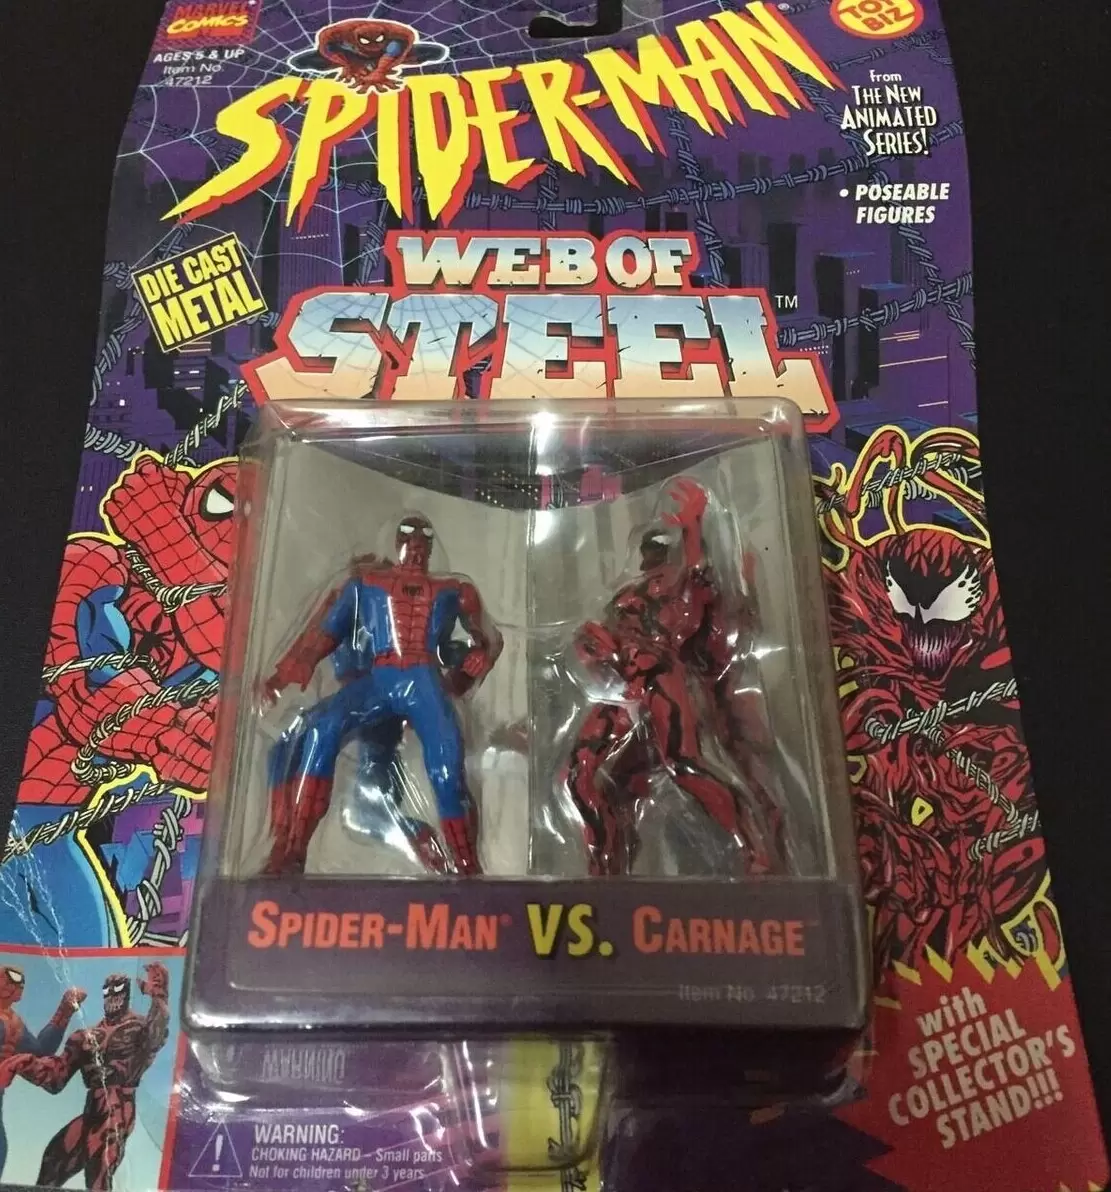 Spider-Man From The New Animated Series - Web of Steel - Spider-Man vs Carnage